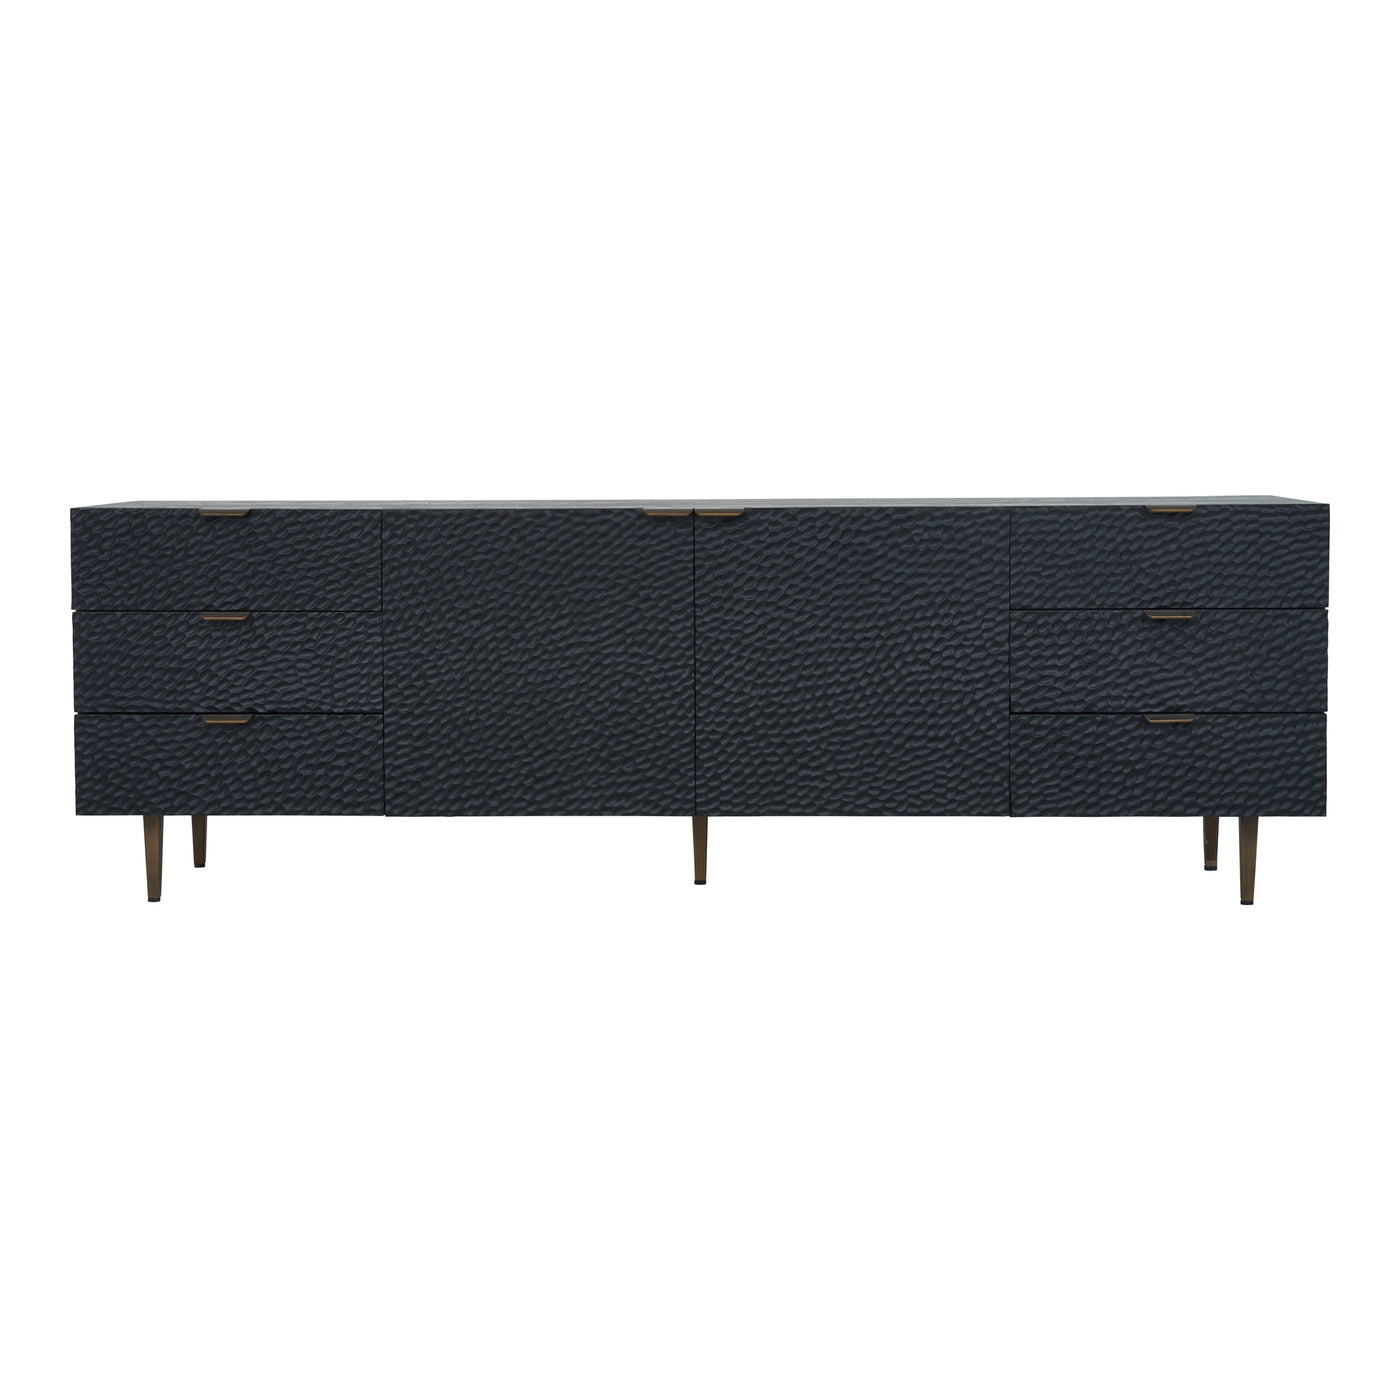 A distinguished silhouette for the dining room. Cutting a suave profile in black and gold, Breu’s textured front façade fe...